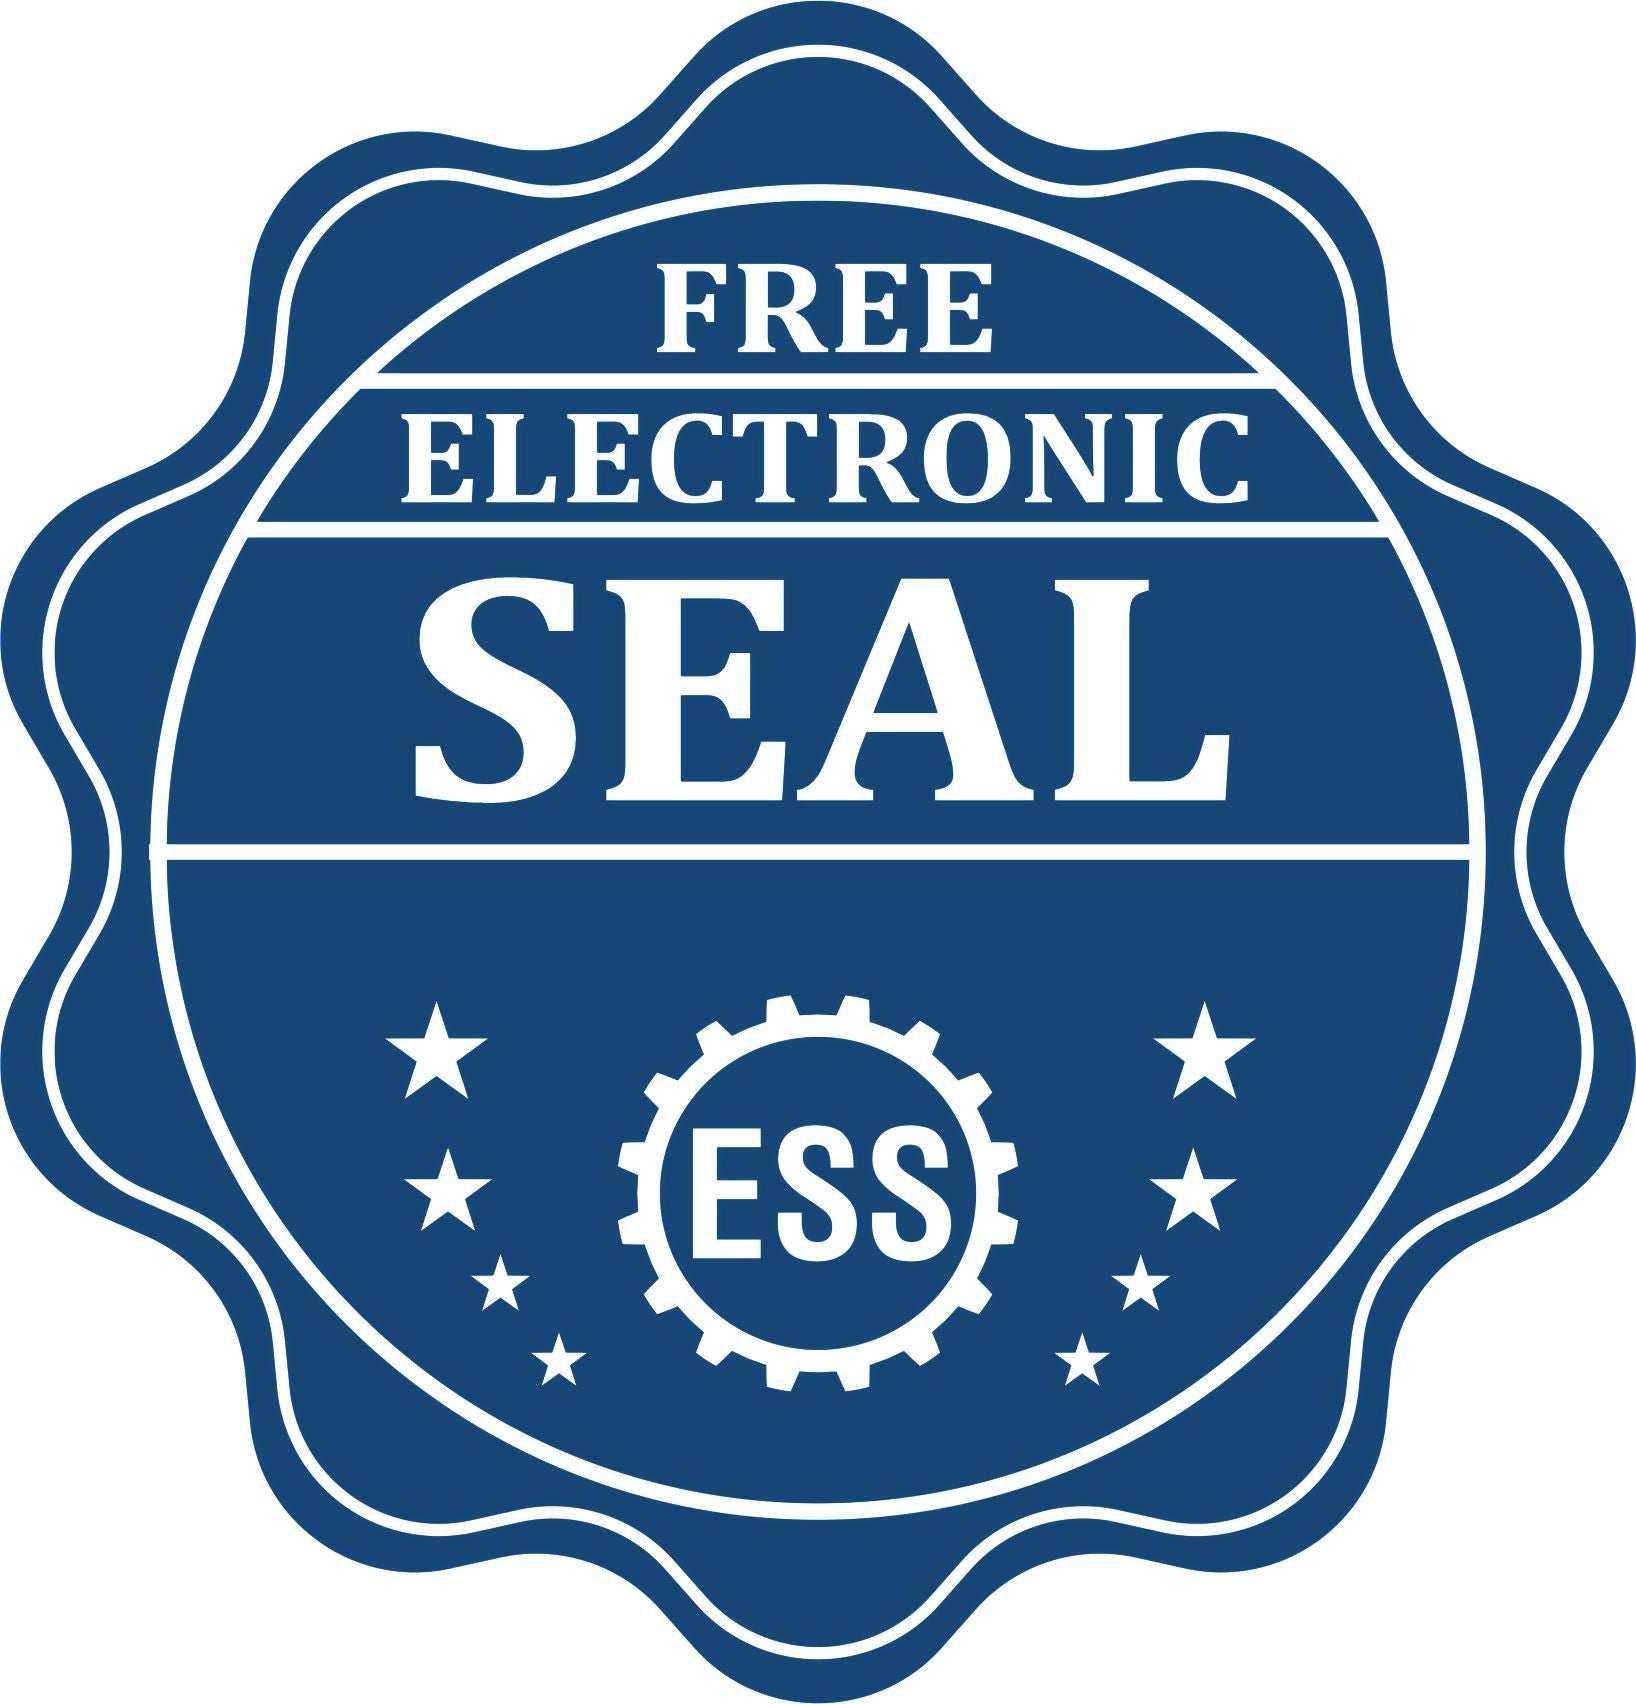 A badge showing a free electronic seal for the Long Reach South Dakota Geology Seal with stars and the ESS gear on the emblem.